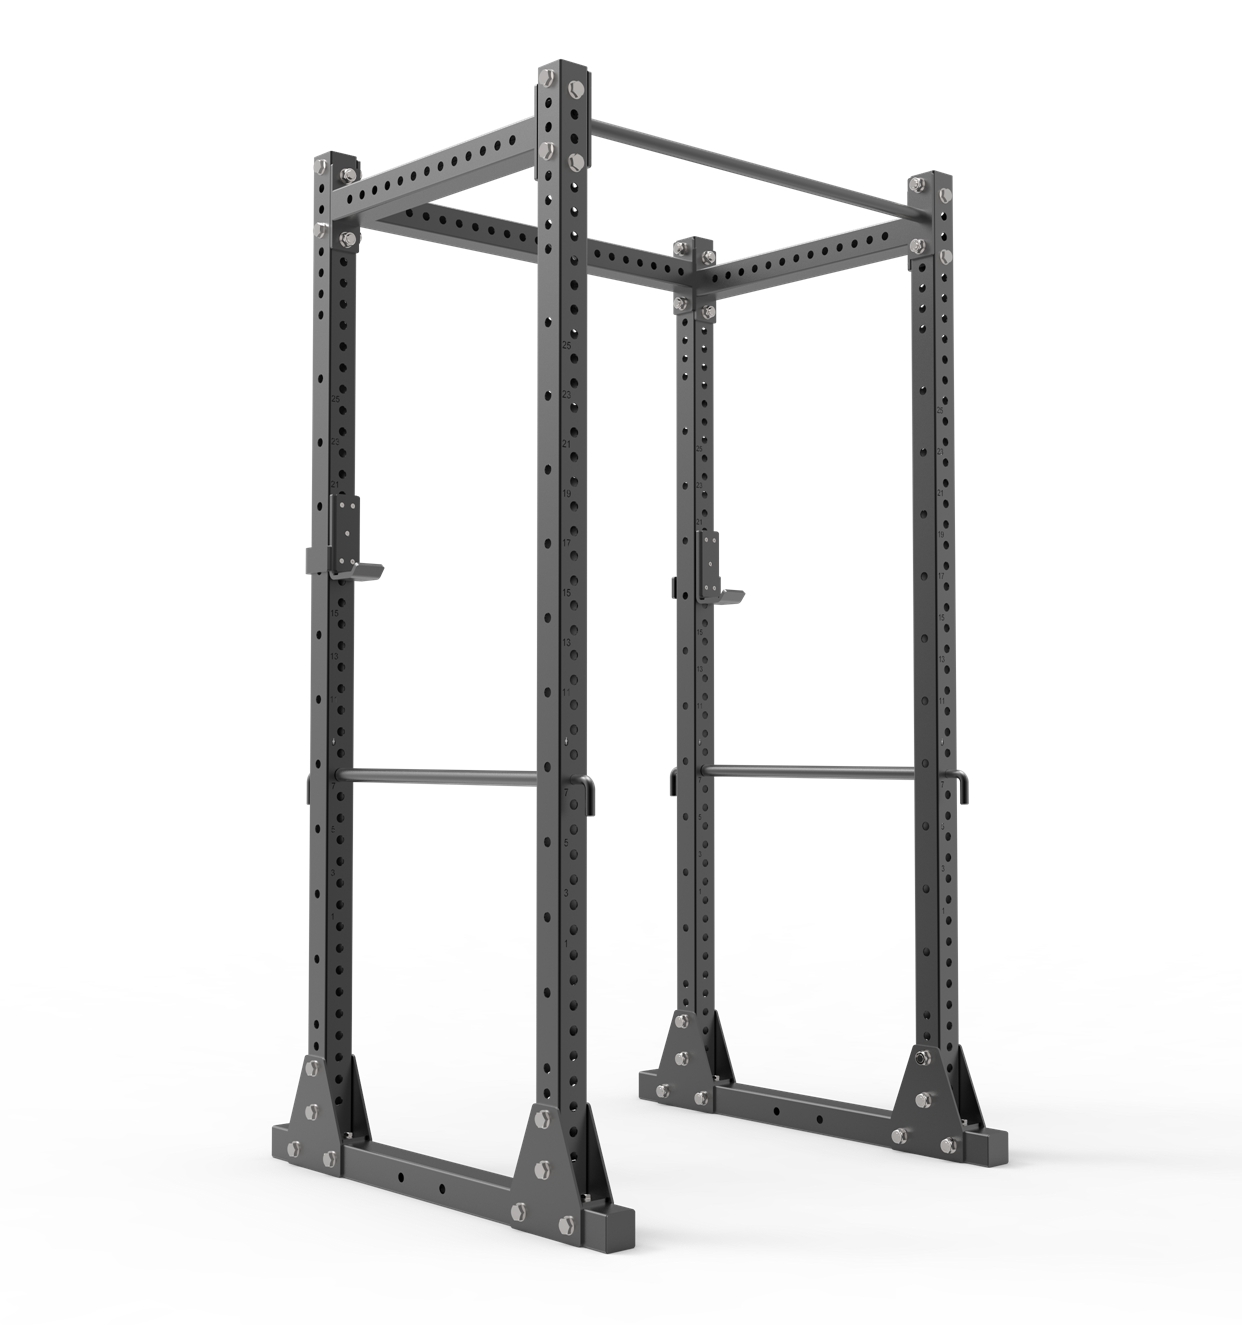 Hot Sale Power Lifting Rack Power Cage